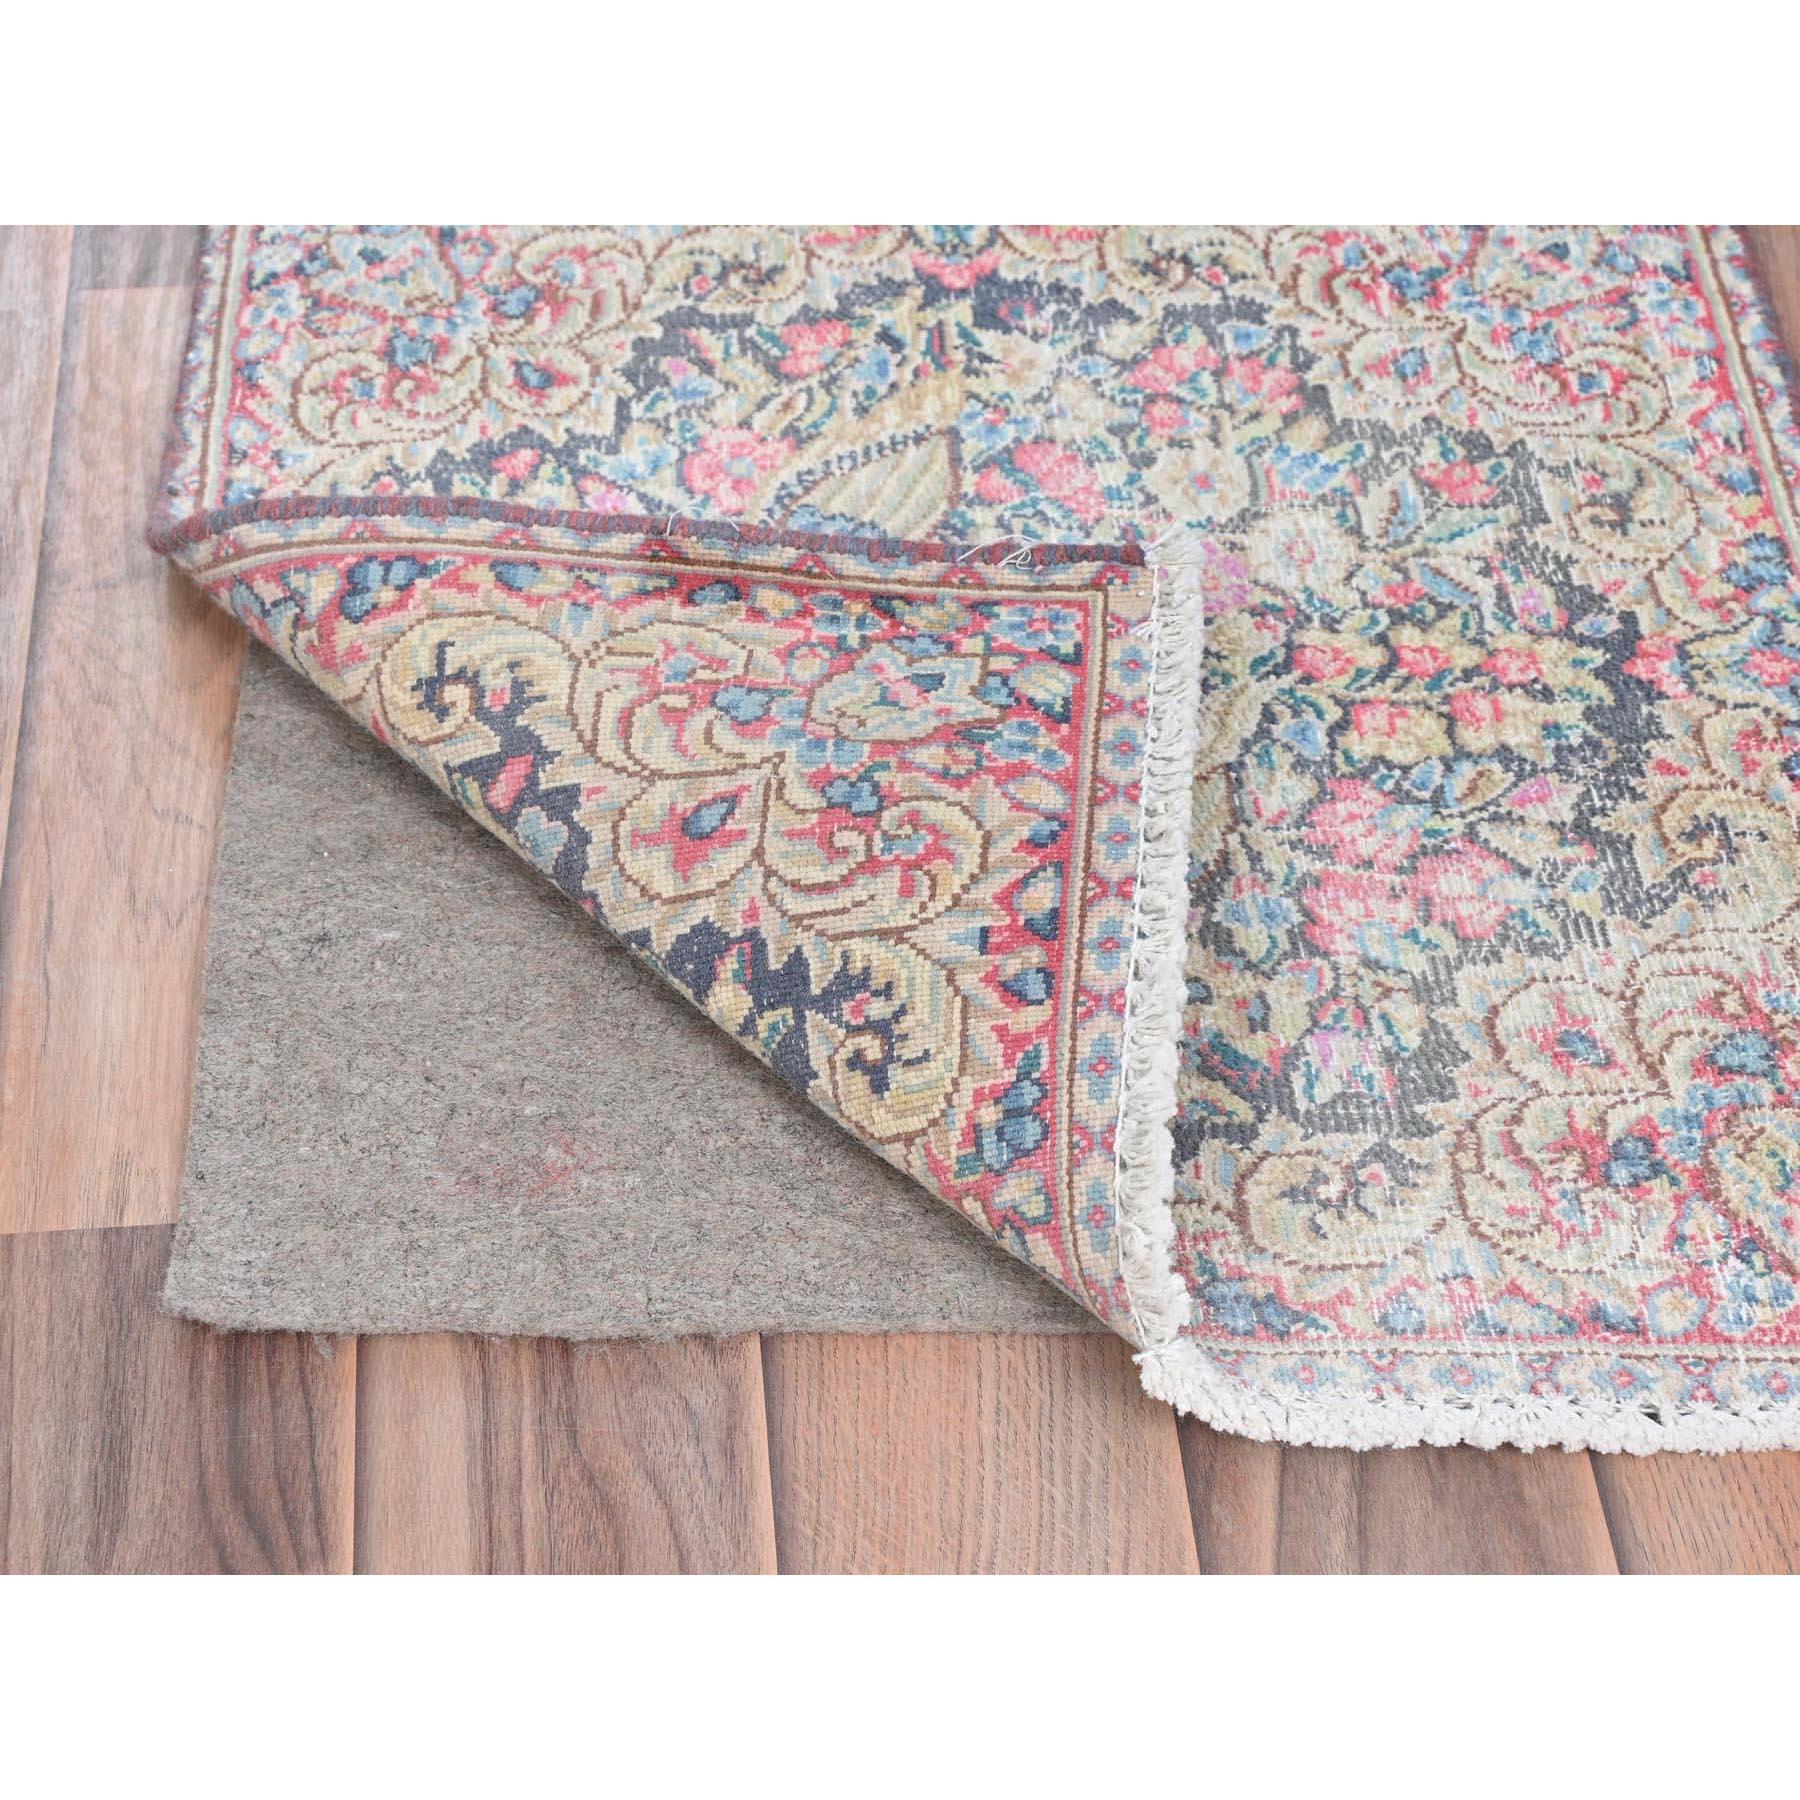 Medieval Colorful Hand Knotted Old Persian Kerman Cropped Thin Distressed Worn Wool Rug For Sale